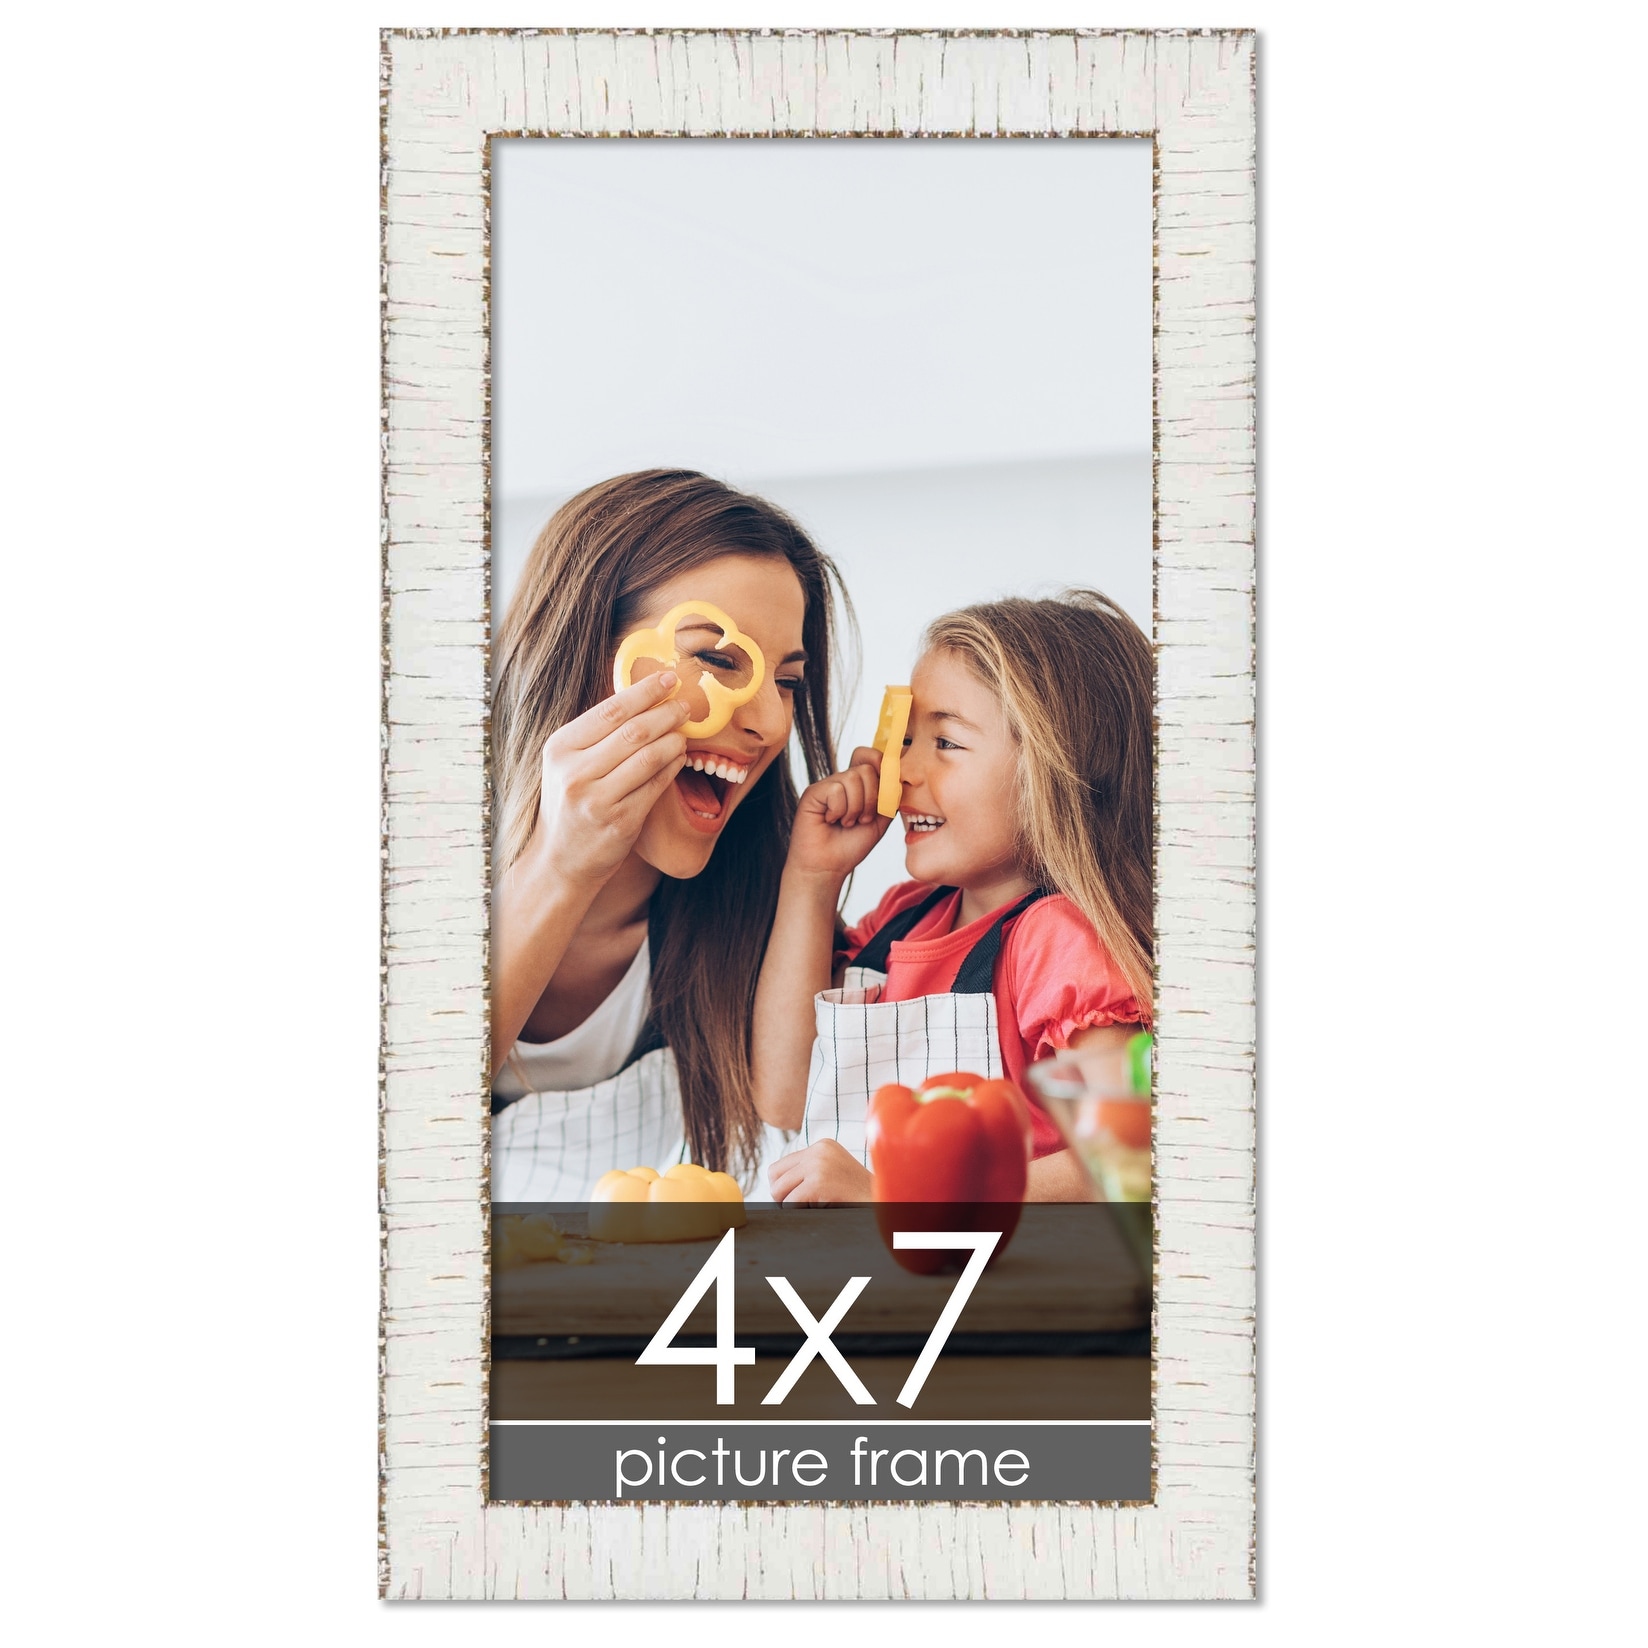 https://ak1.ostkcdn.com/images/products/is/images/direct/111ed64c52fc9016276511319eec7f0ac52f6a9e/4x7-White-Rustic-Birch-Wood-Picture-Frame-with-UV-Acrylic%2C-Foam-Board-Backing%2C-%26-Hardware.jpg